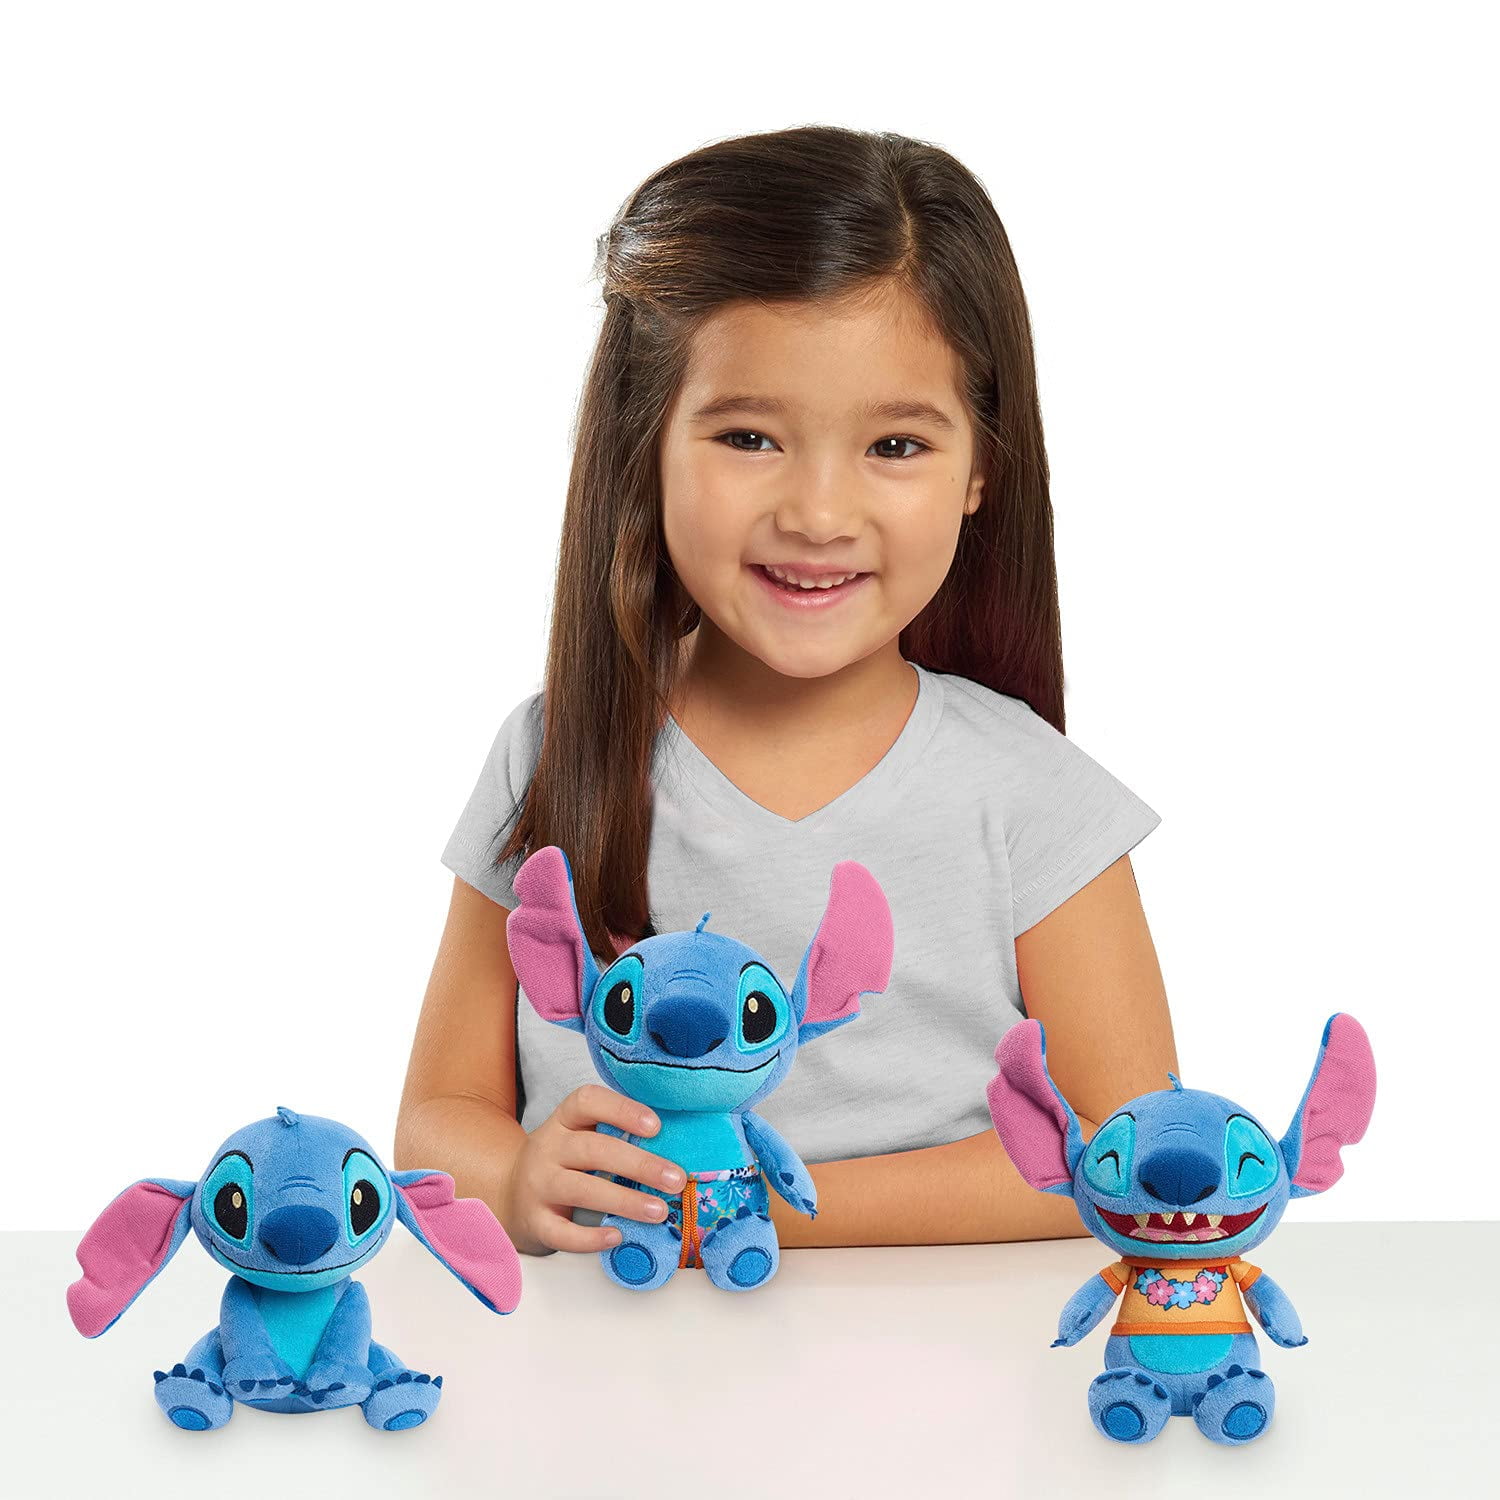 Lilo & Stitch 10cm Beanbag Plushie, Floppy Ears Stitch, Officially Licensed  Kids Toys for Ages 2 Up, Gifts and Presents by Just Play 